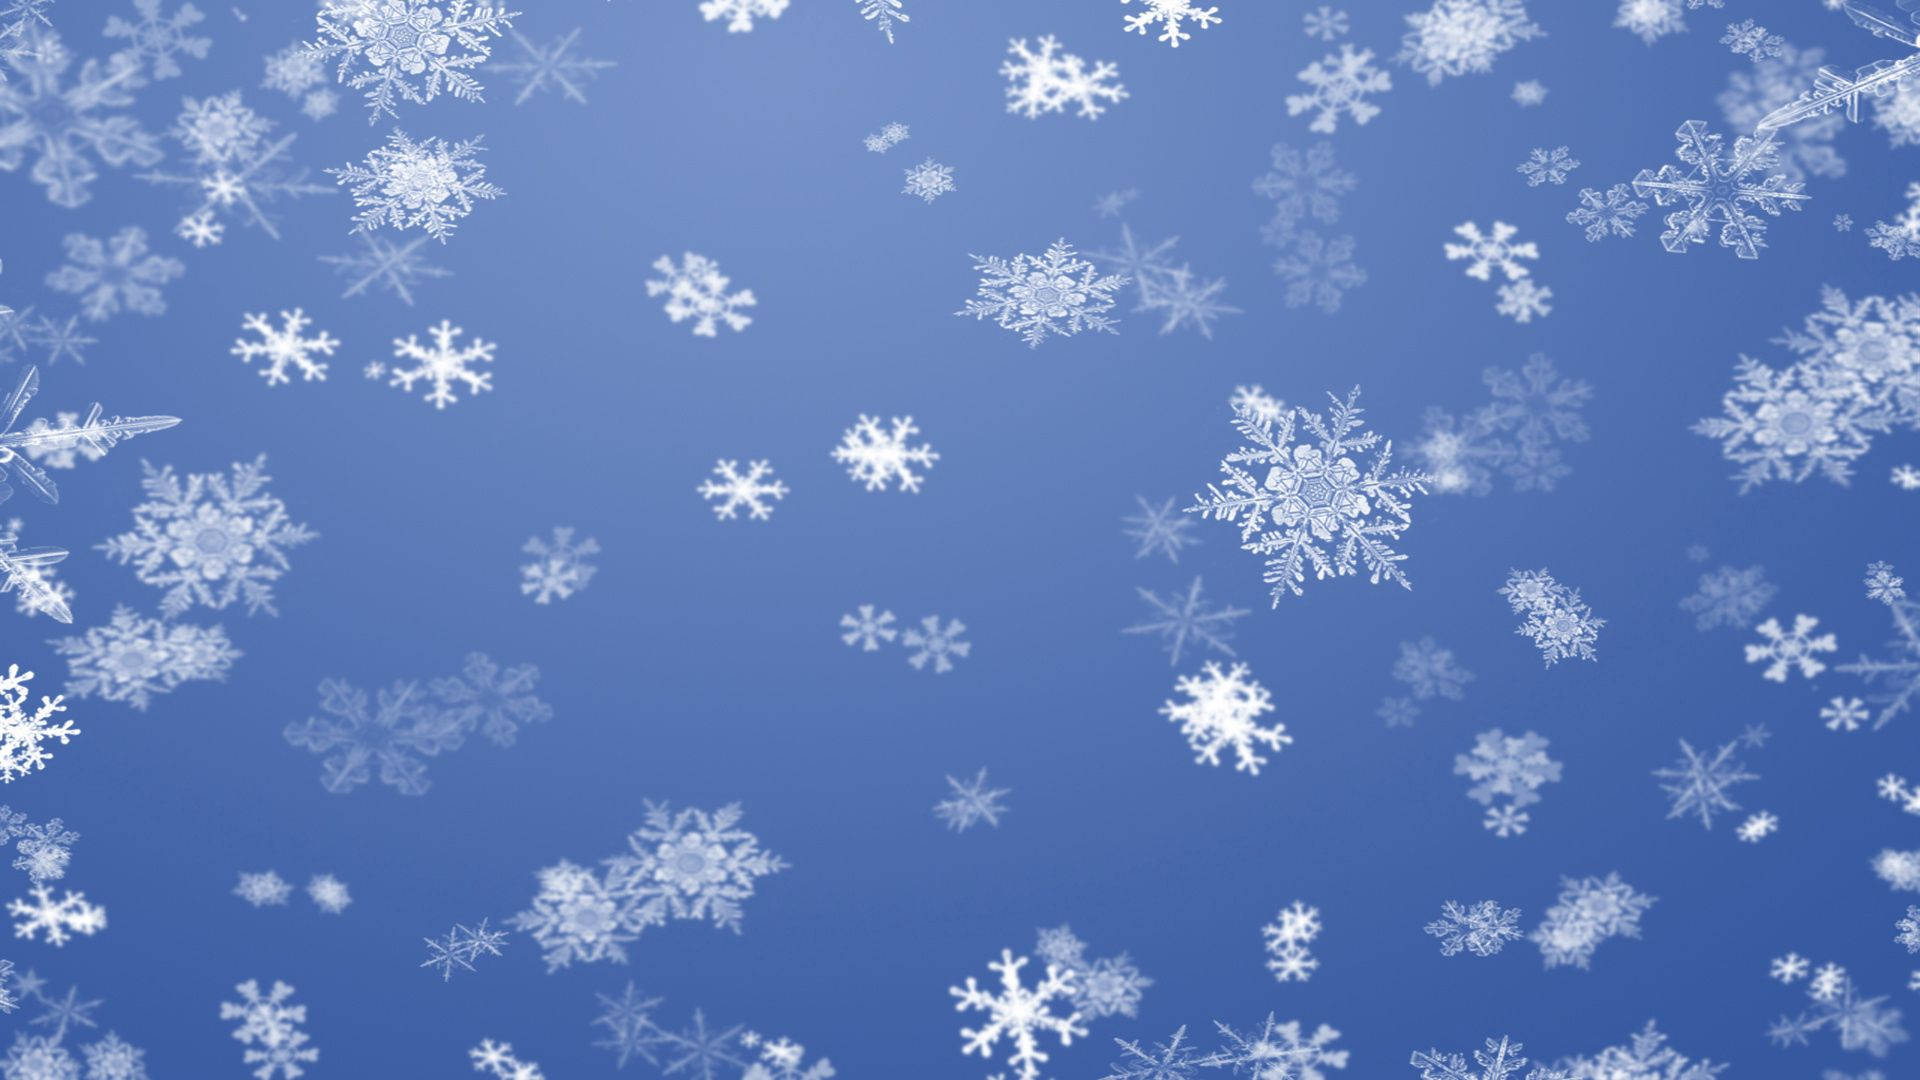 Snowflake 1920X1080 Wallpaper and Background Image